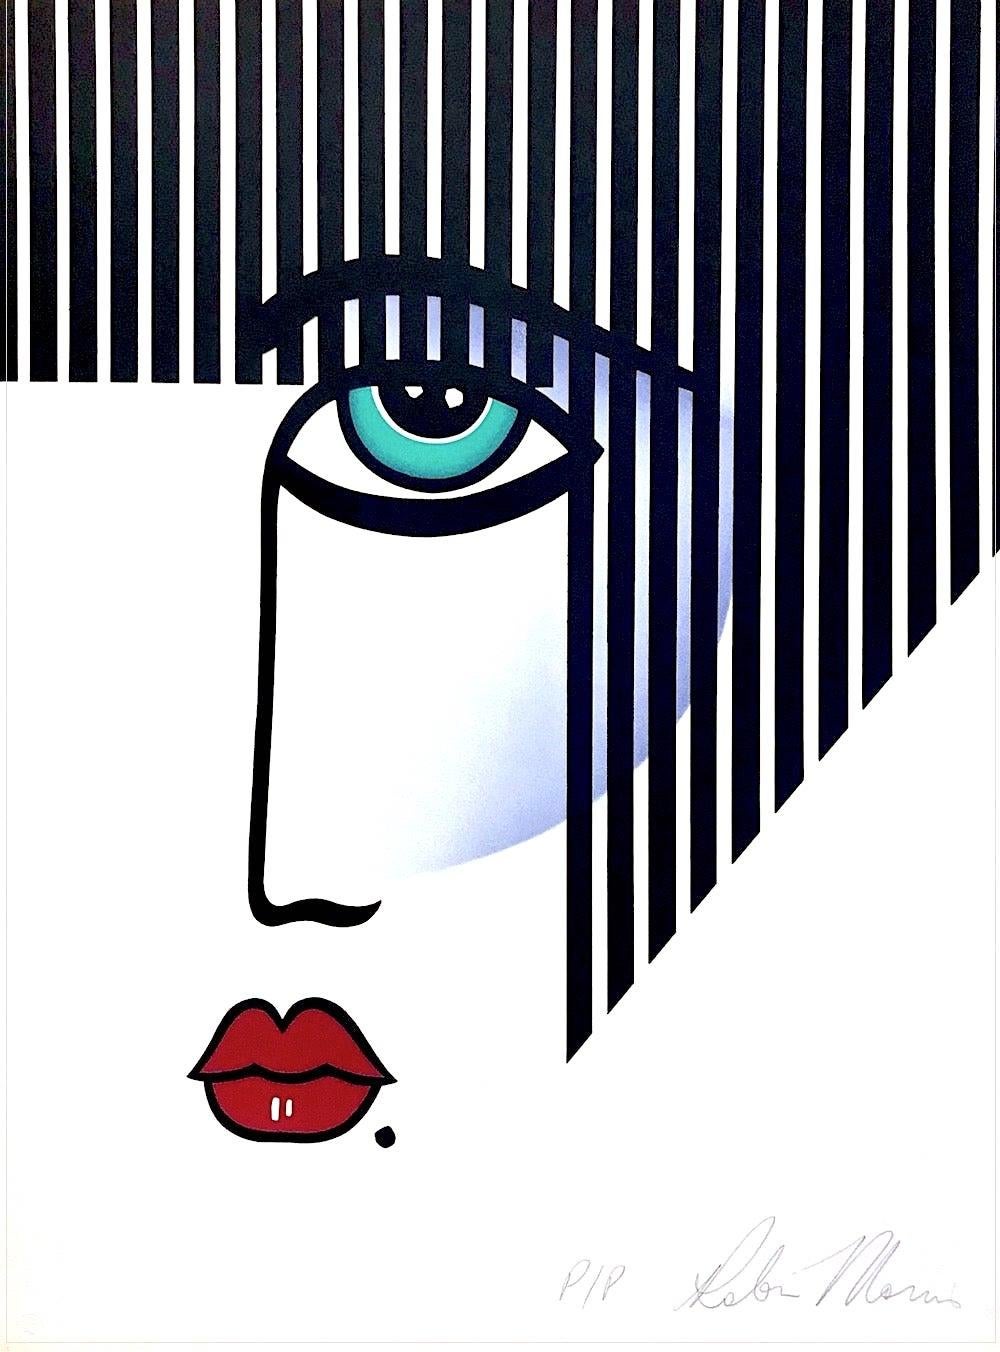 Robin Morris Abstract Print - NEW DECO Signed Lithograph Modern Art Deco Portrait, Black Stripe Hair, Red Lips